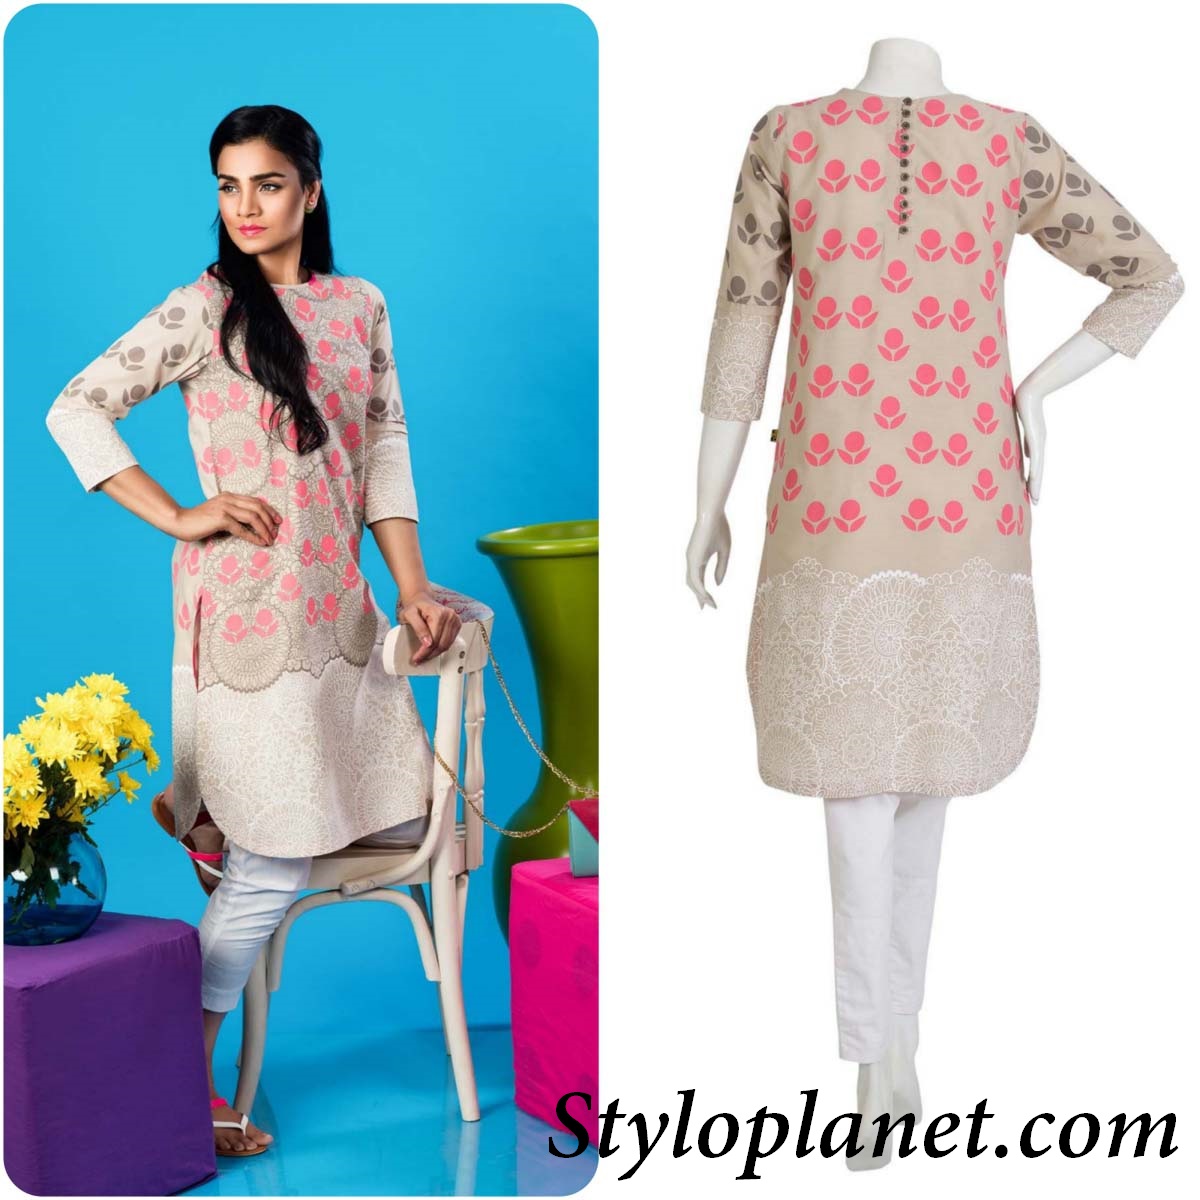 stylo dresses summer collection 2018